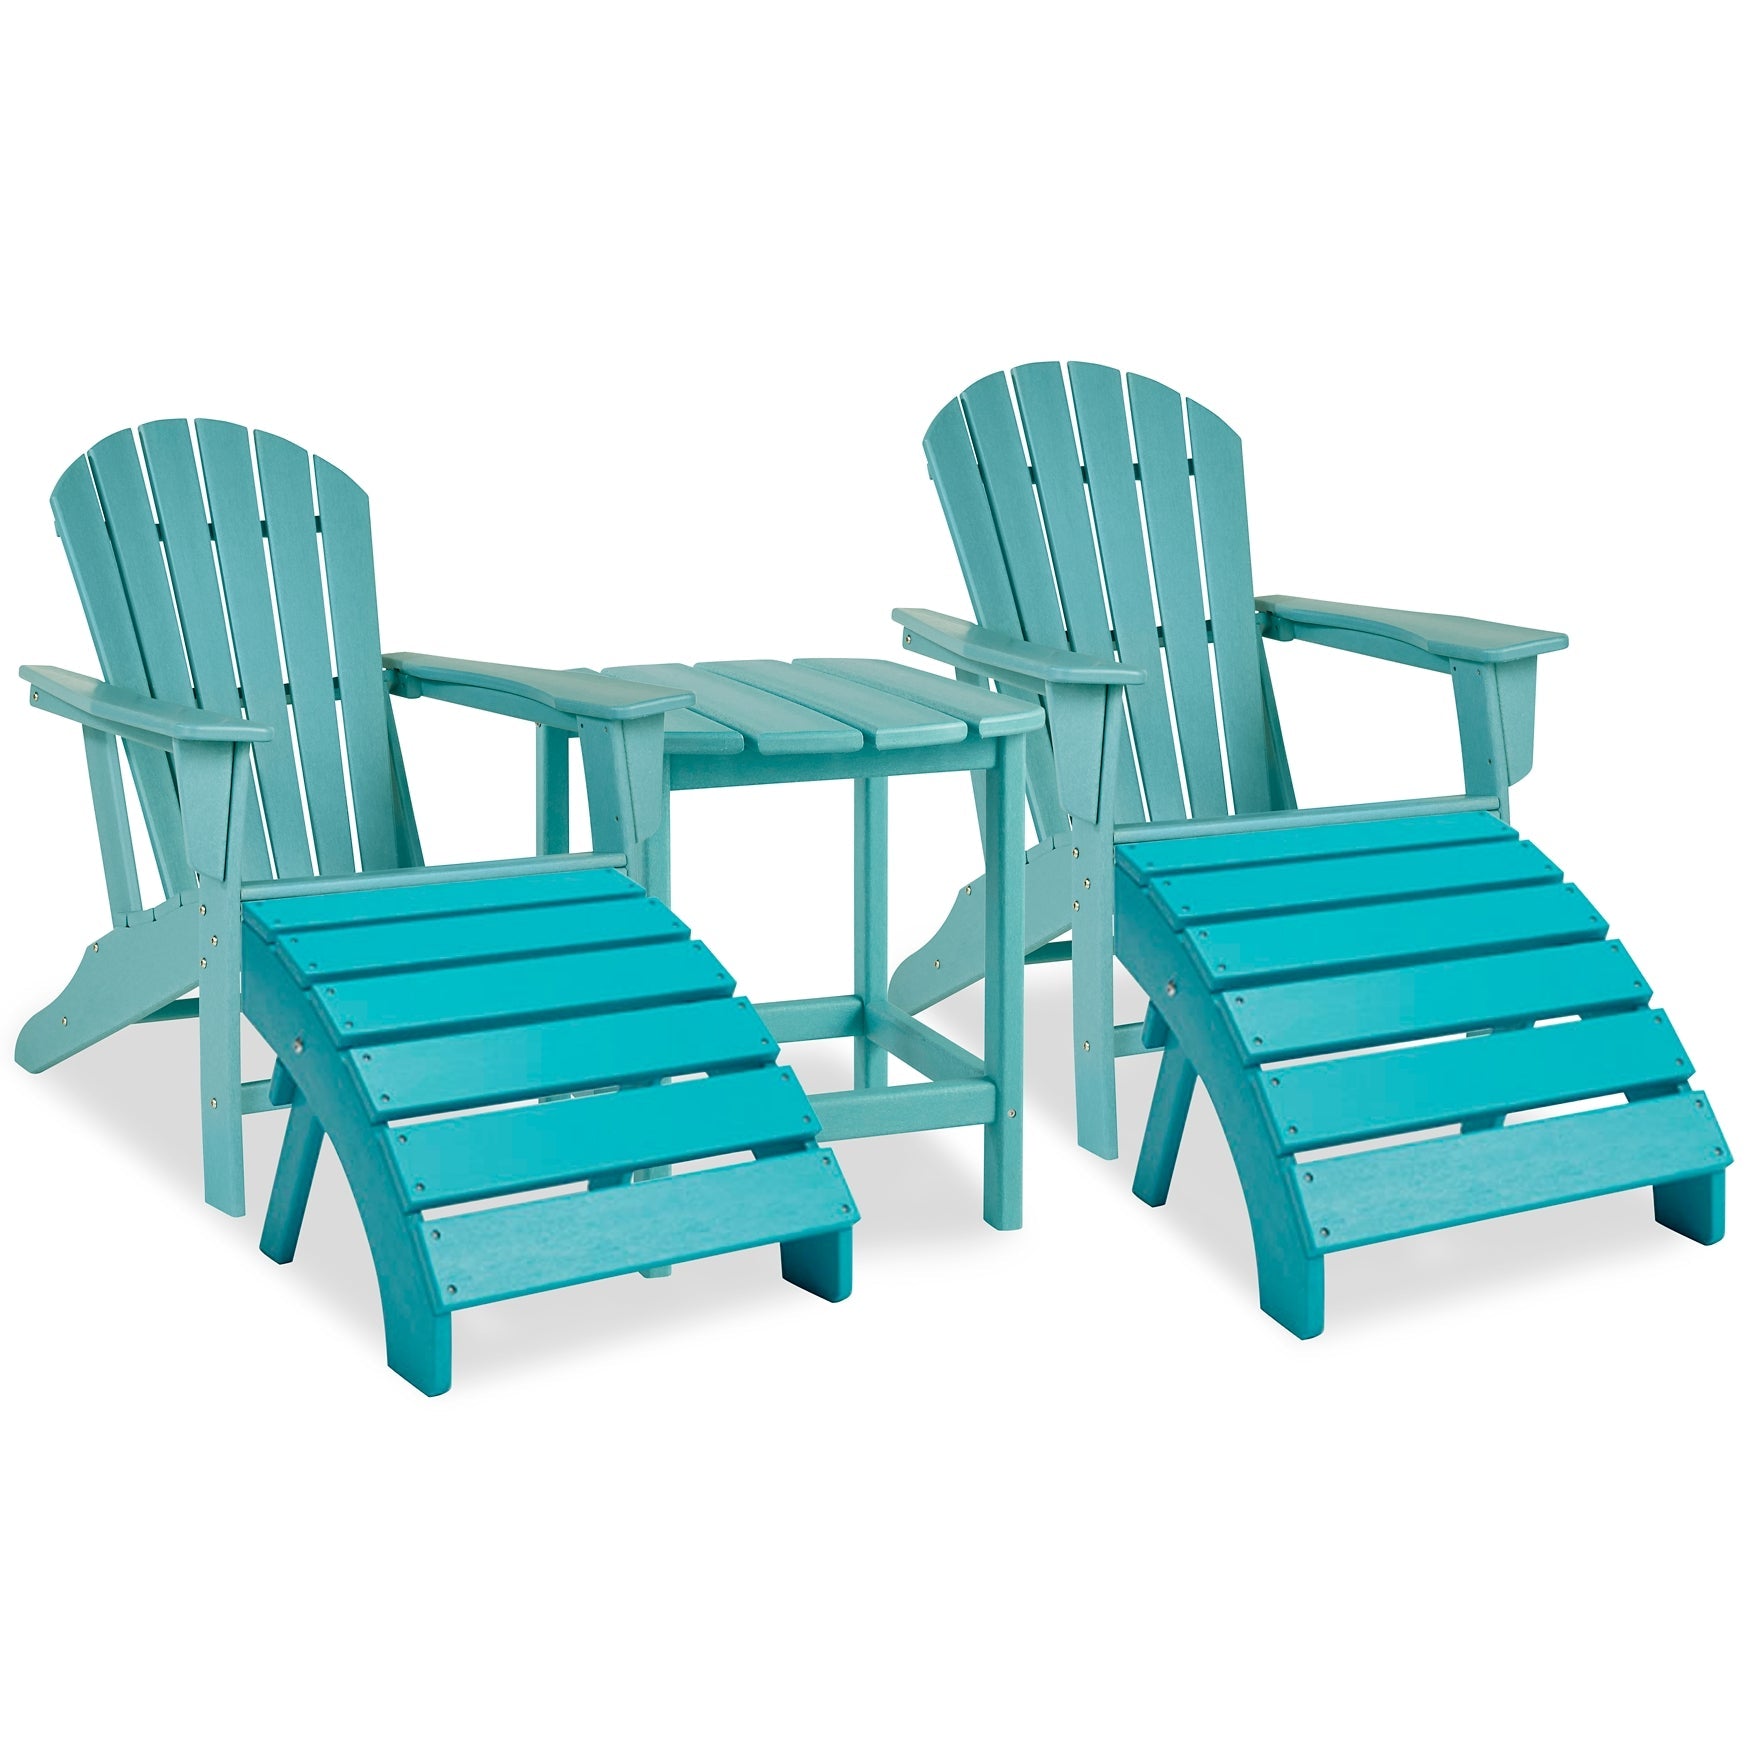 Sundown Treasure 2 Outdoor Adirondack Chairs and Ottomans with Side Table at Cloud 9 Mattress & Furniture furniture, home furnishing, home decor